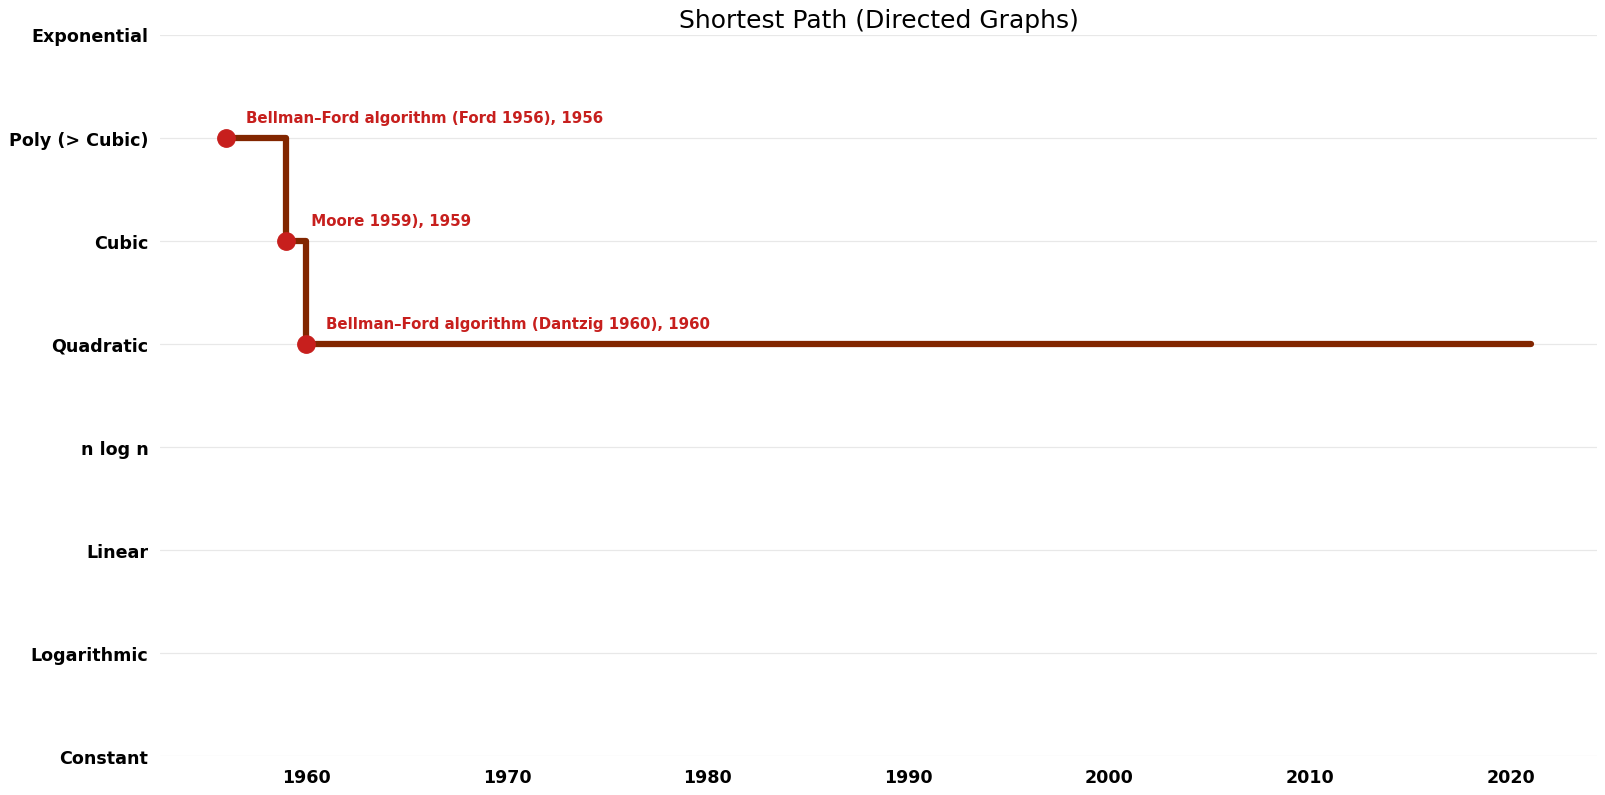 File:Shortest Path (Directed Graphs) - Time.png